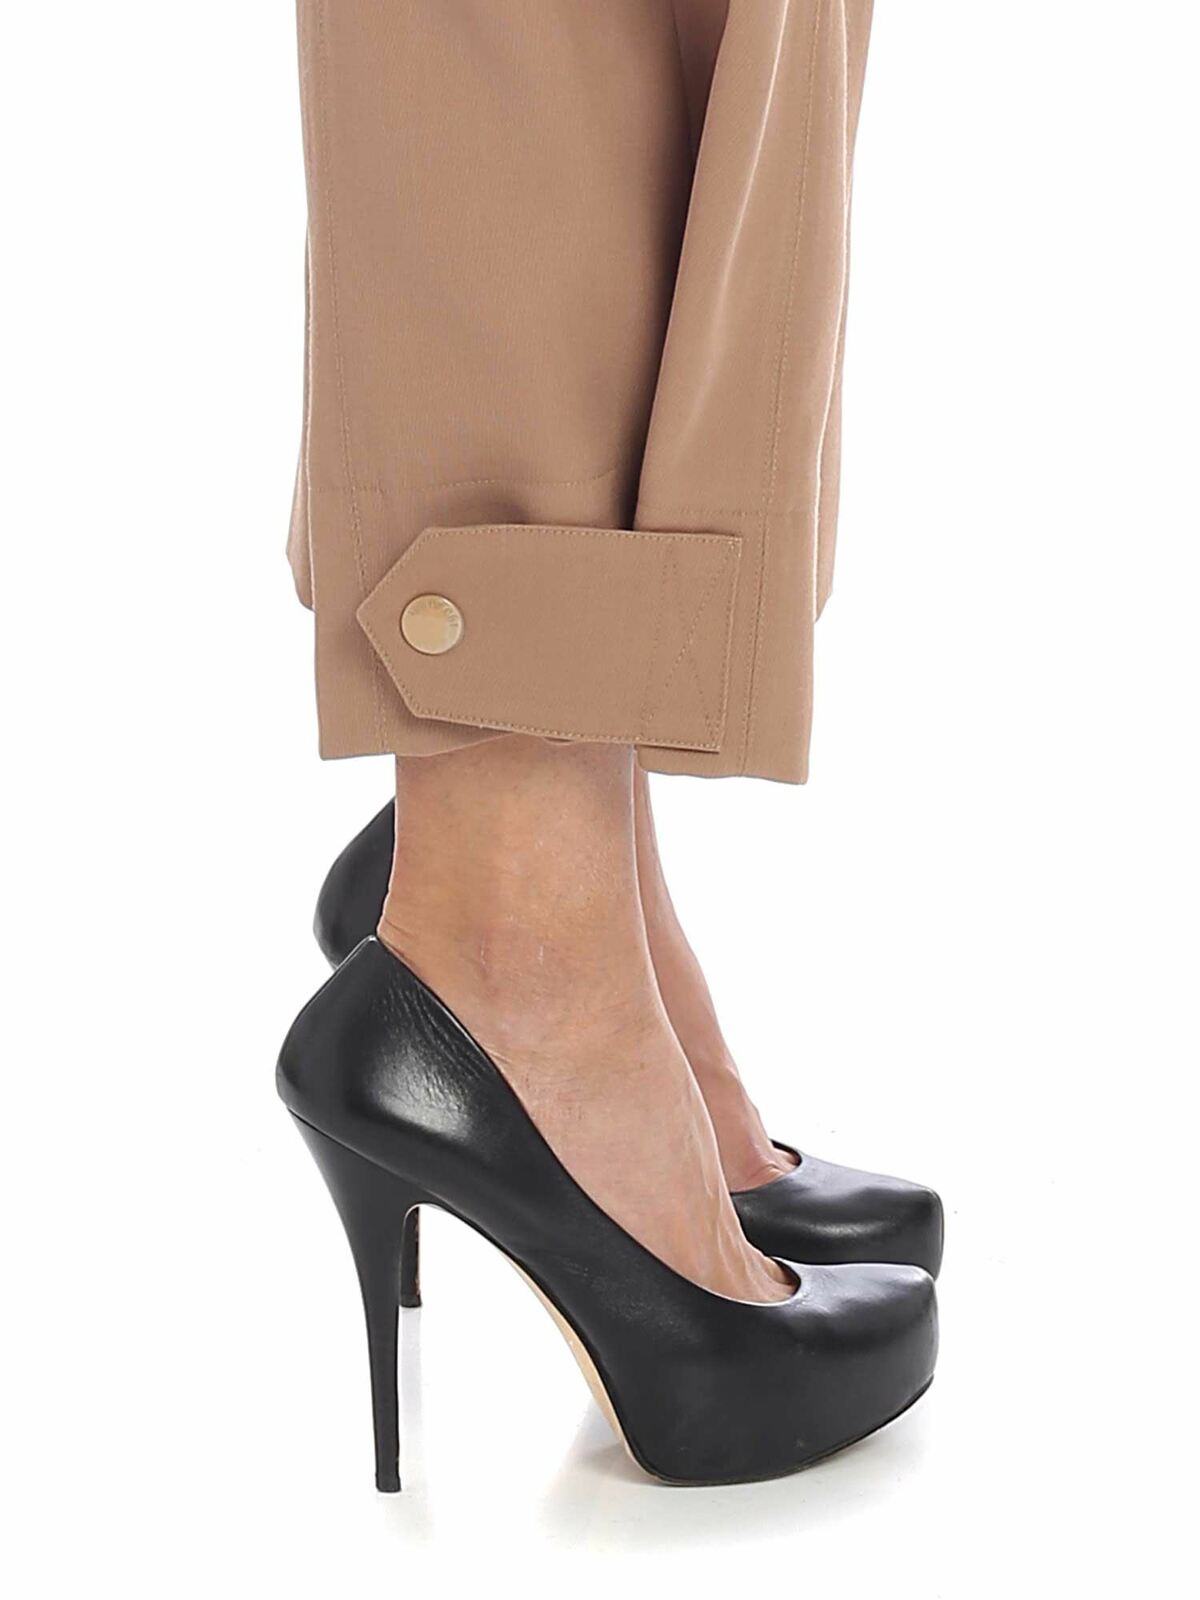 Shop See By Chloé Cropped Trousers In Camel